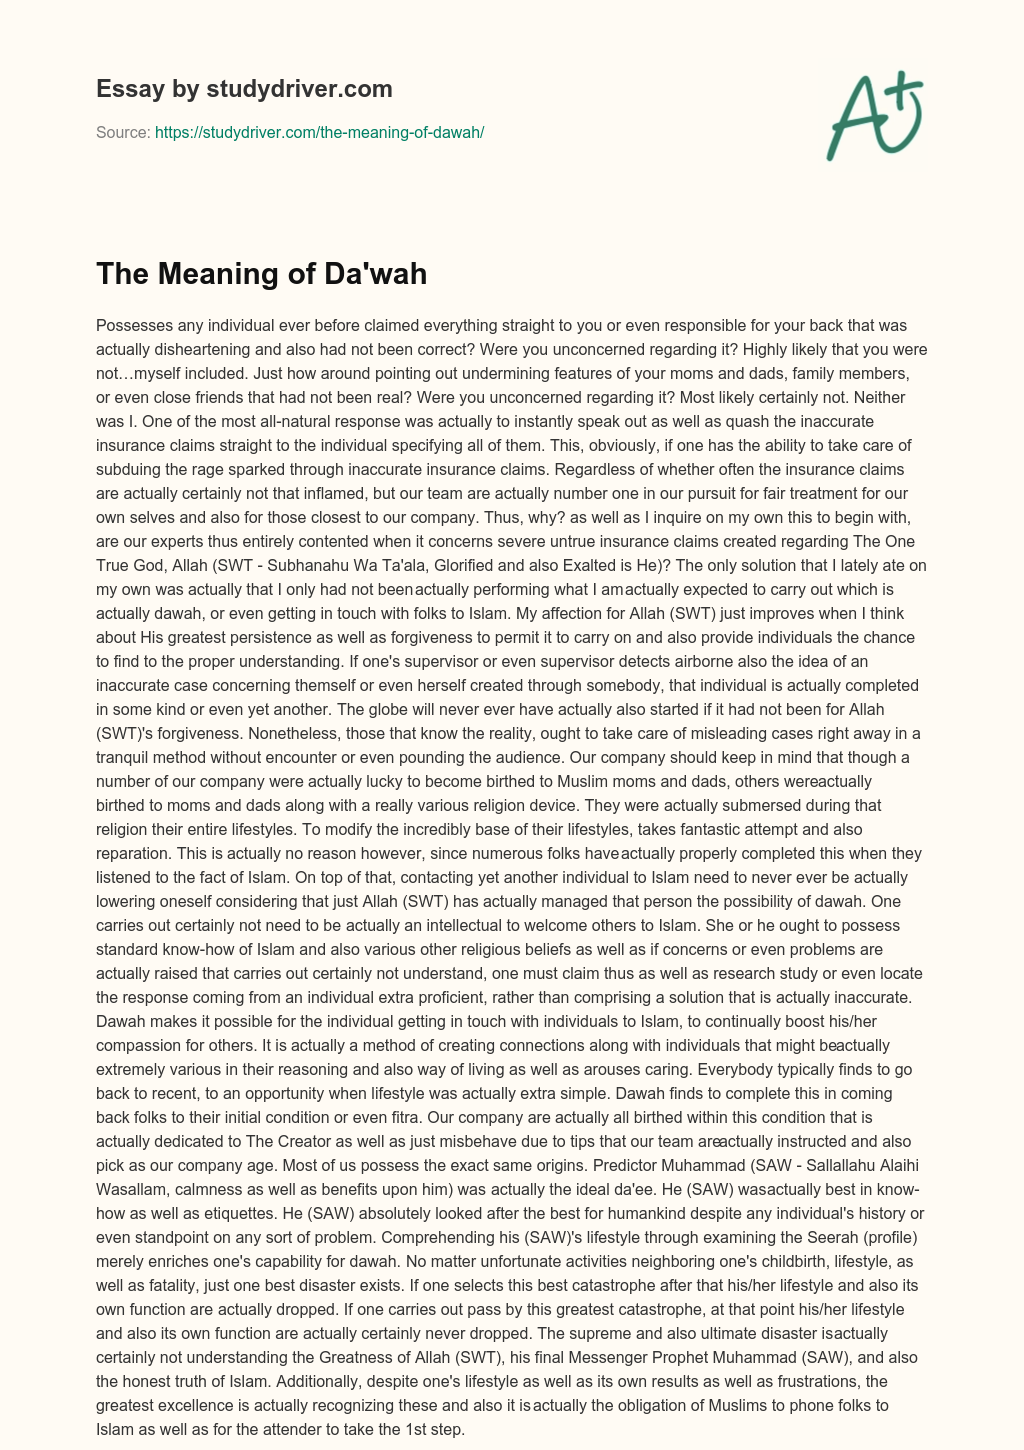 The Meaning of Da’wah essay